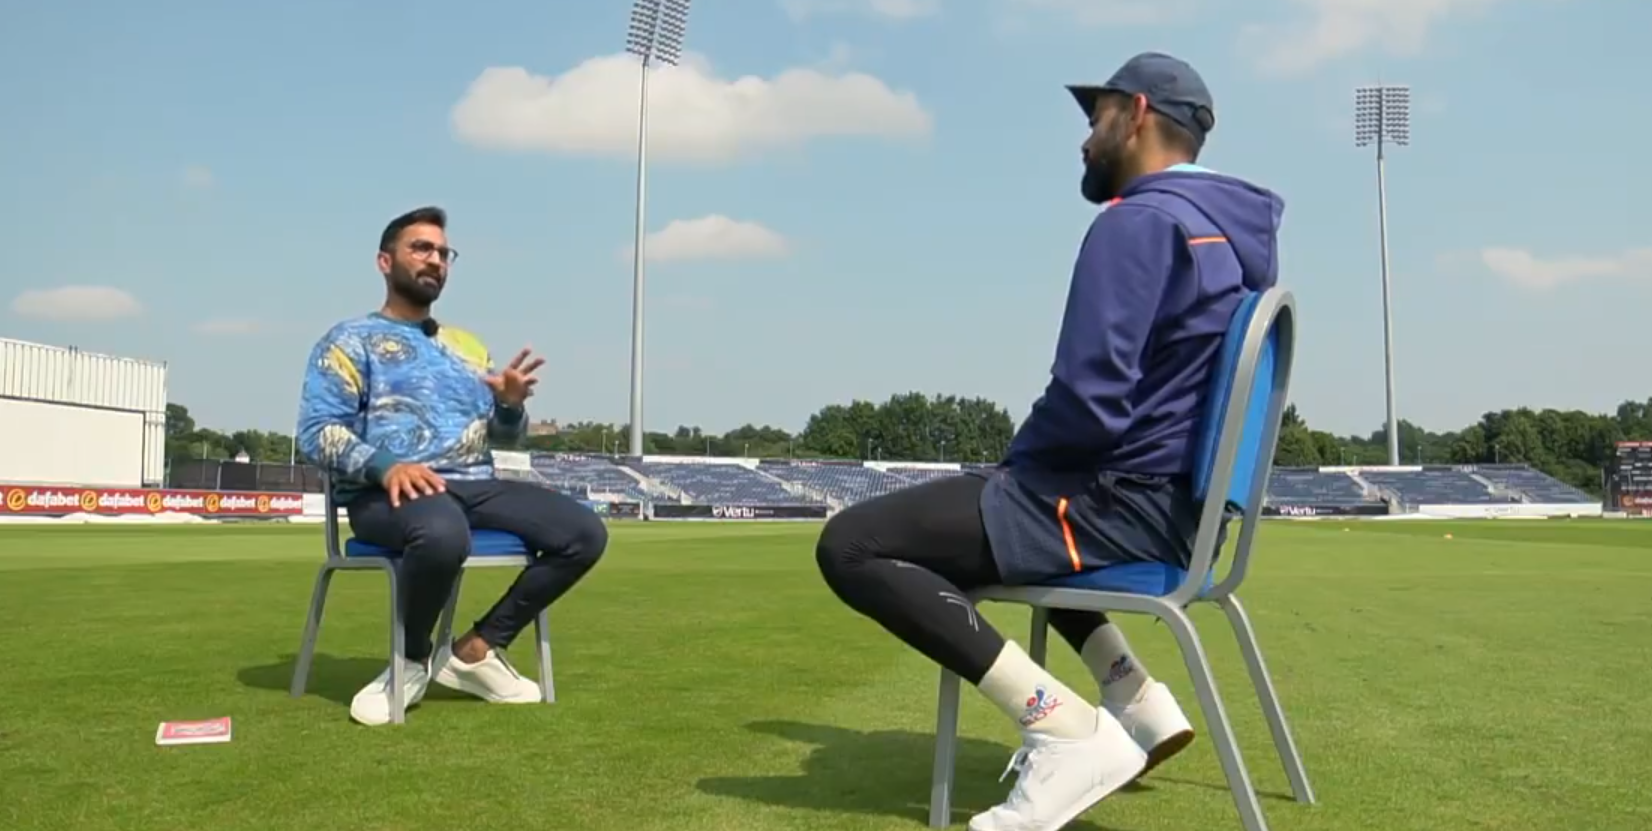 ENG vs IND 2021: “For Indian Cricket It Will Be Huge” – Virat Kohli Weighs In On The Importance Of England Tour